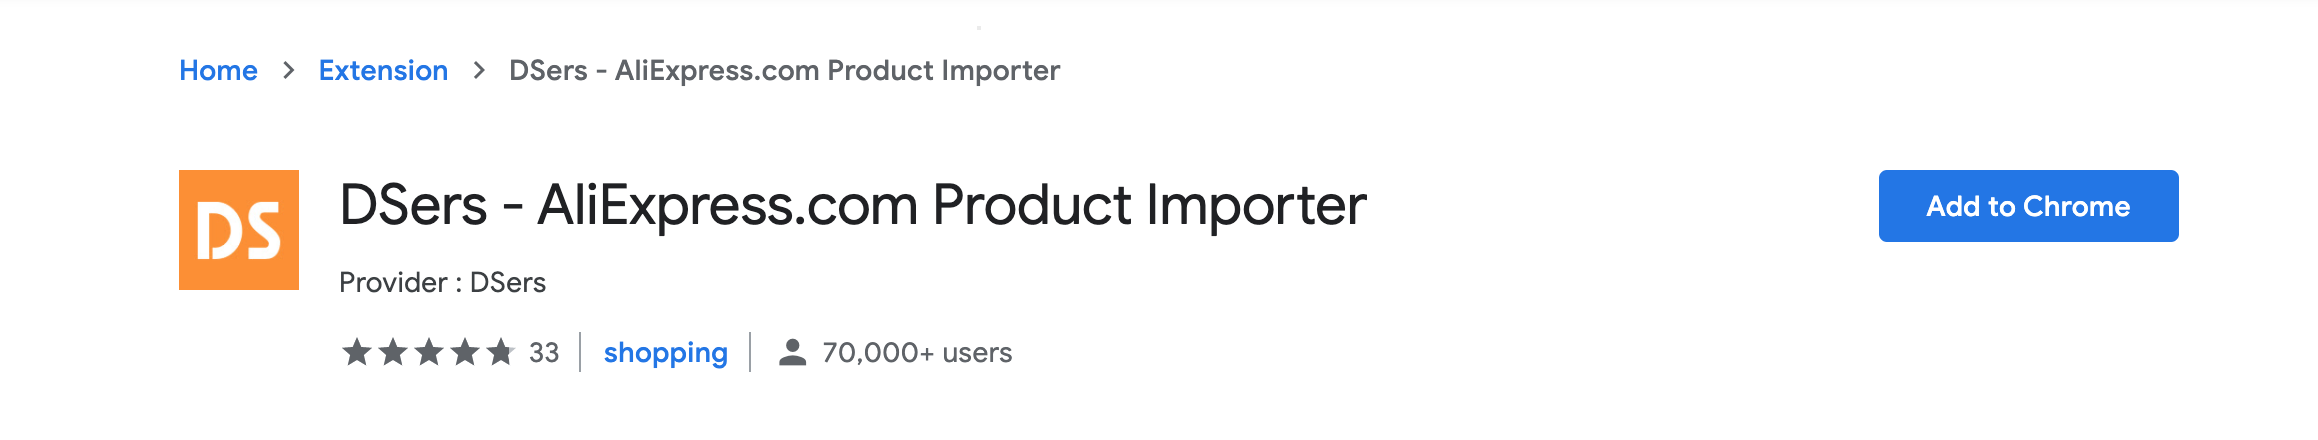 Import products from AliExpress - DSers Chrome Extension - Wix DSers